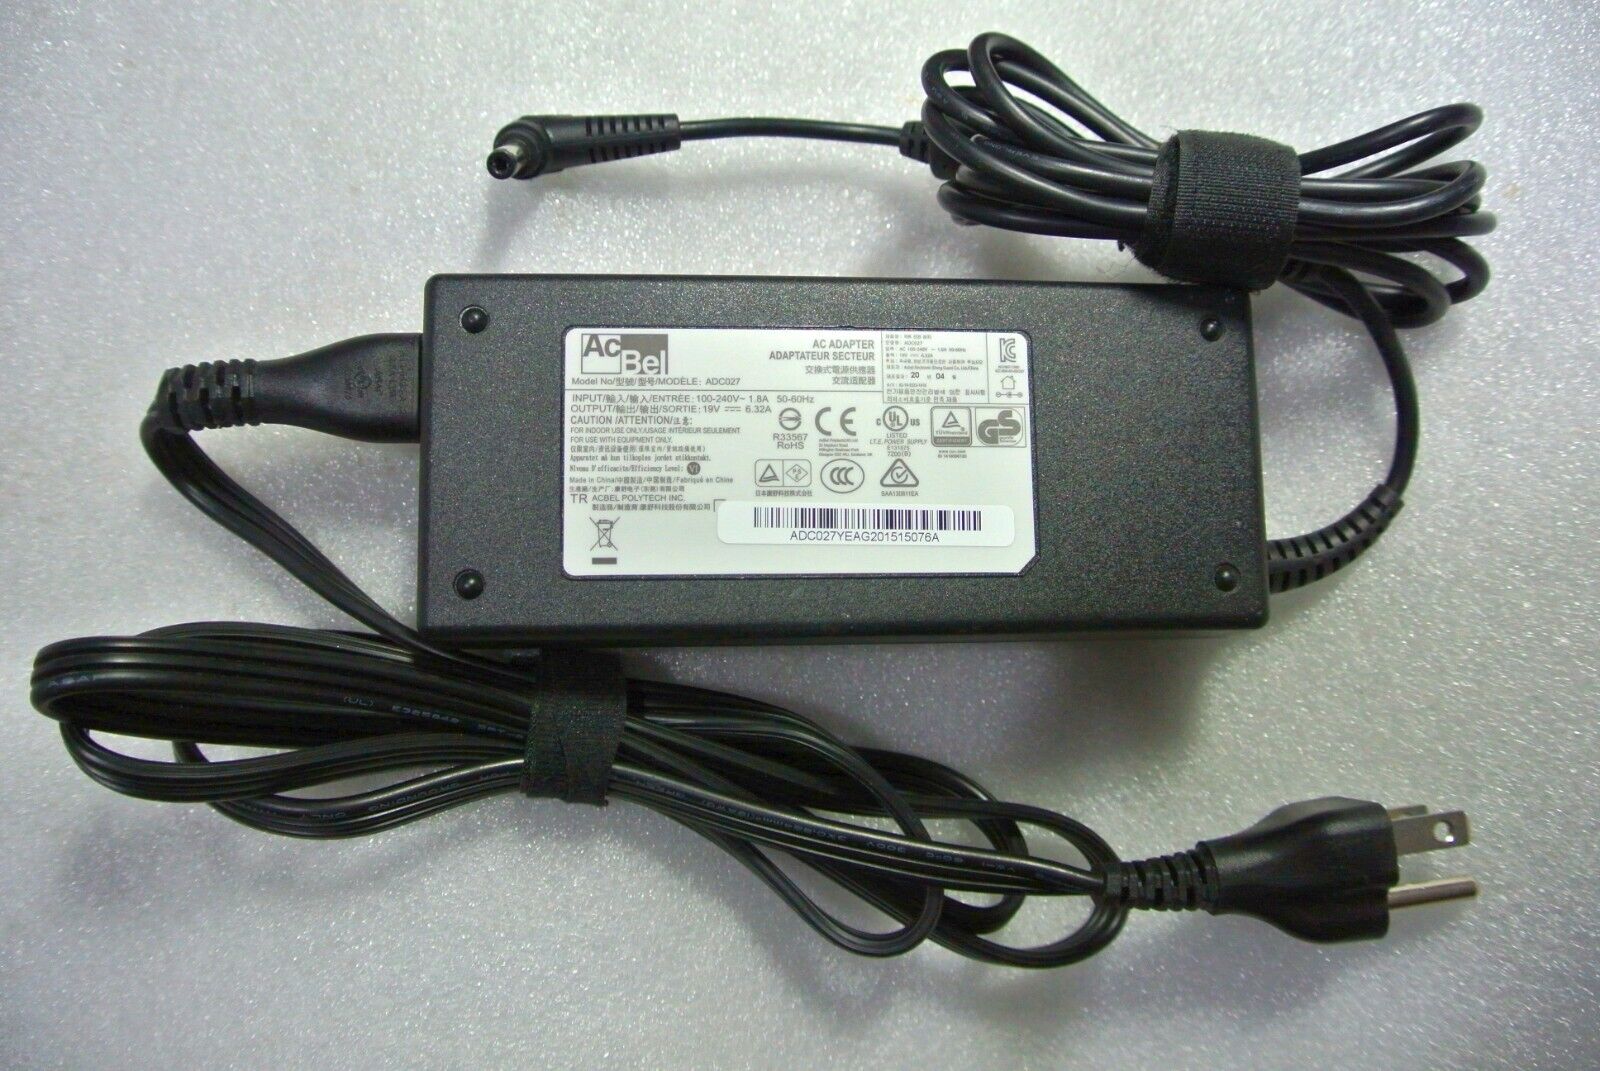 Genuine AcBel AC Power Adapter Model ADC027 120W 19V 6.32A Power Supply Brand AcBel Compatible Brand For AcBel Type Pow - Click Image to Close